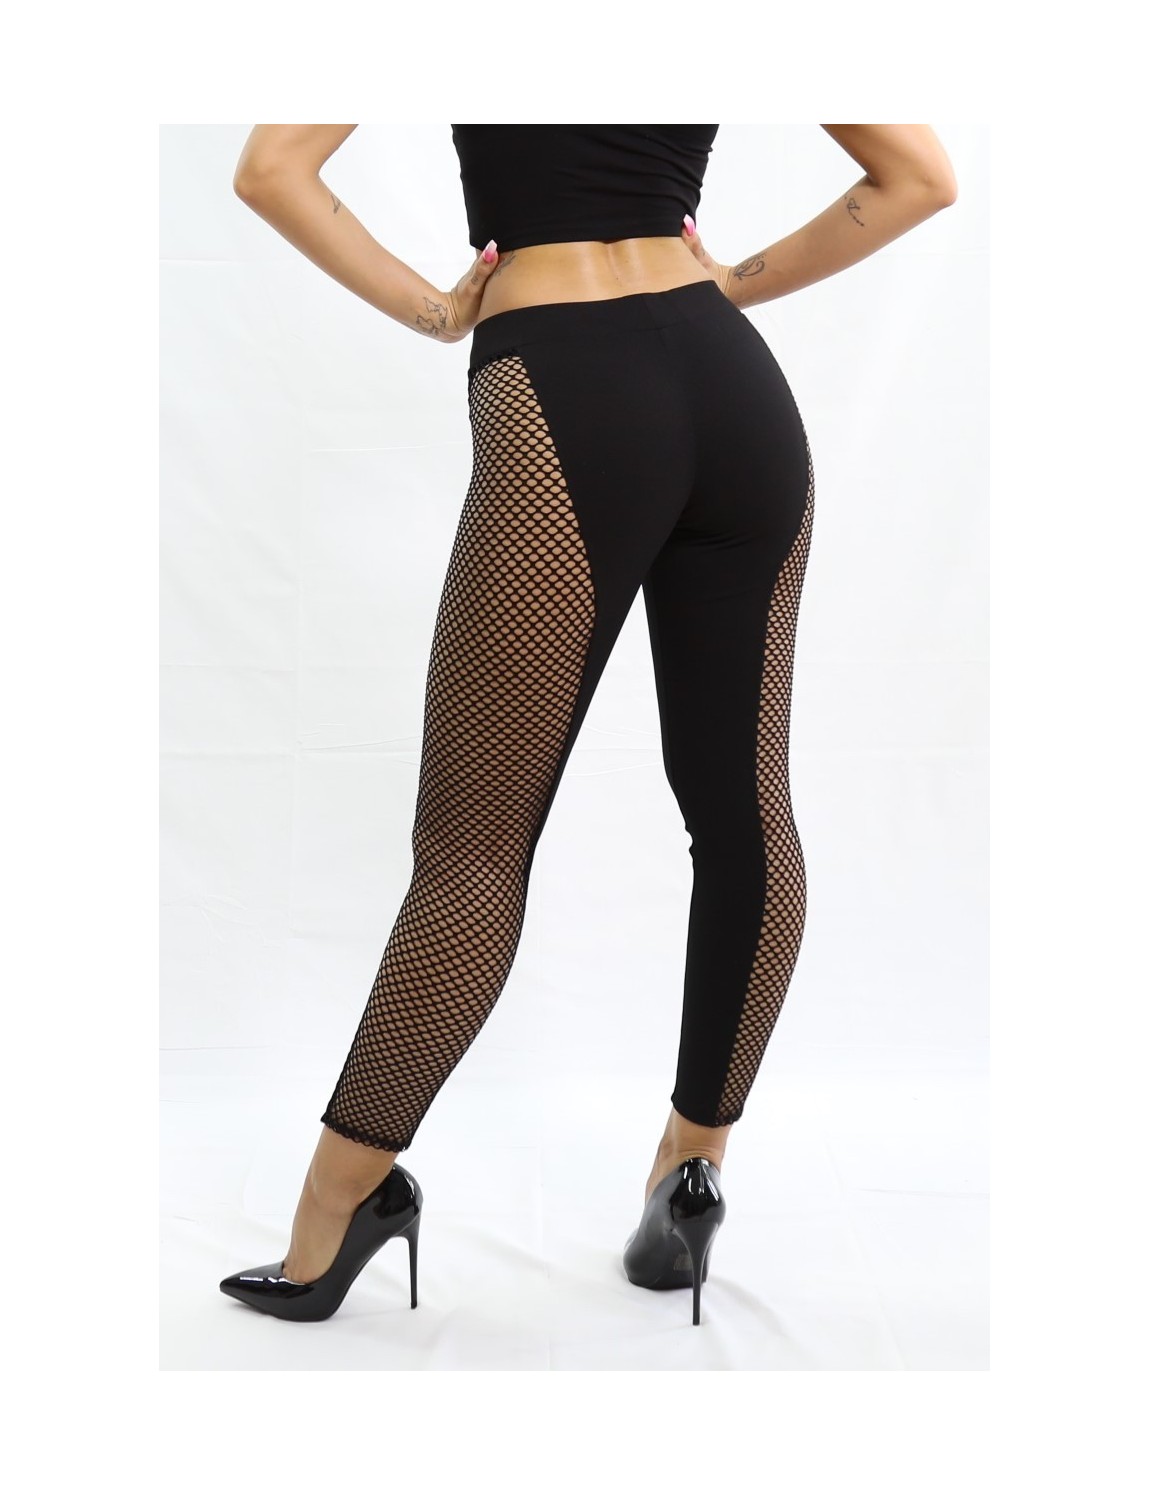 Desiree Bachata Leggings Wholesale  International Society of Precision  Agriculture